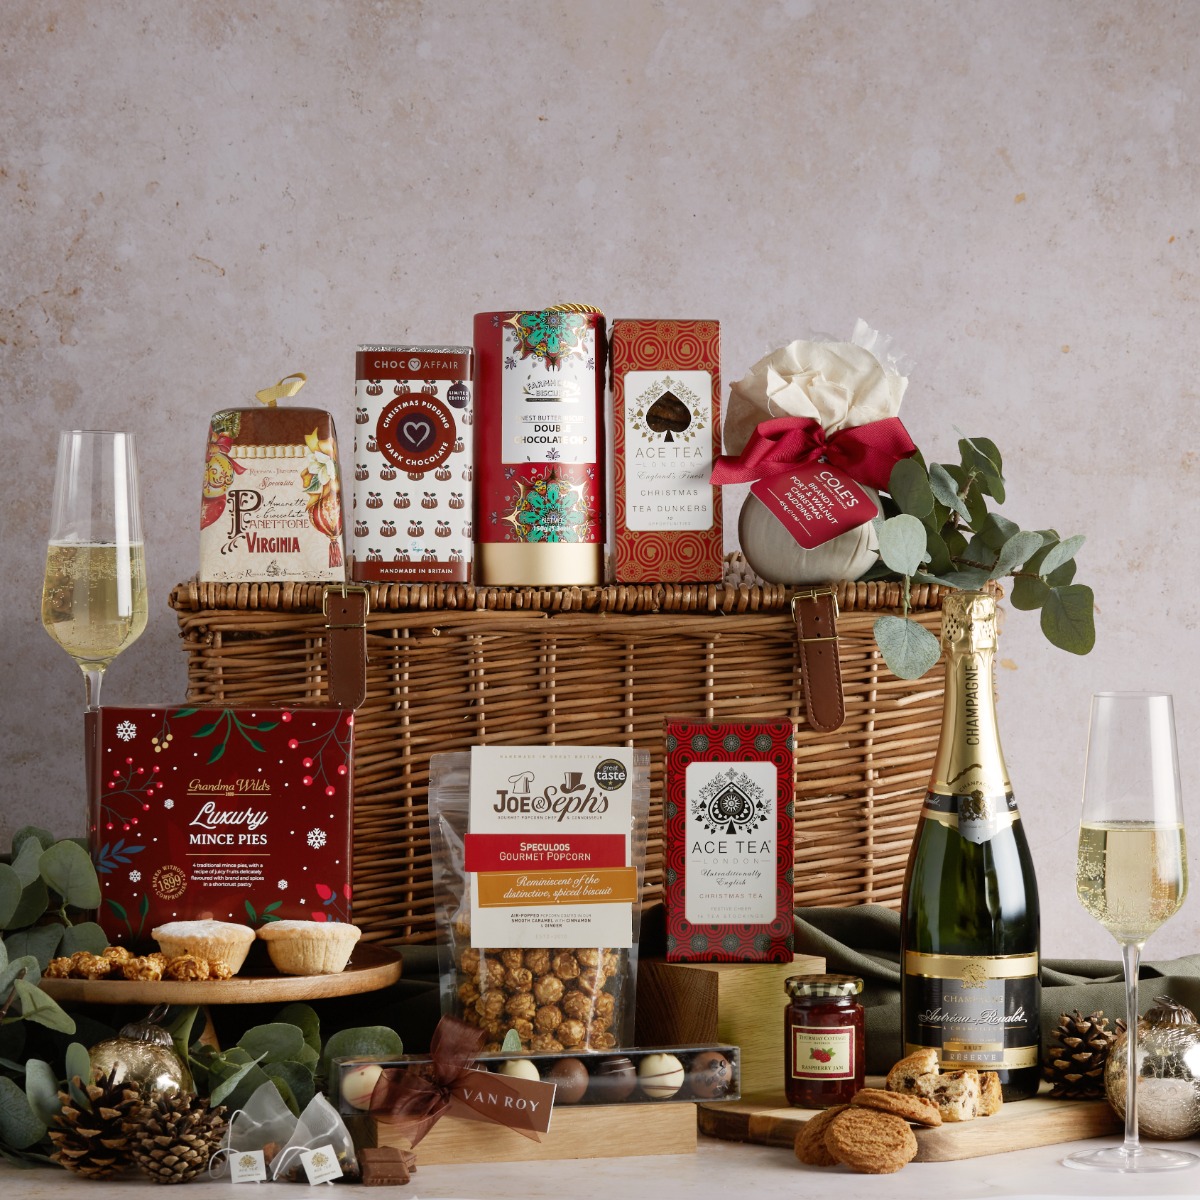 The Luxury Traditional Christmas Hamper with festive contents on display